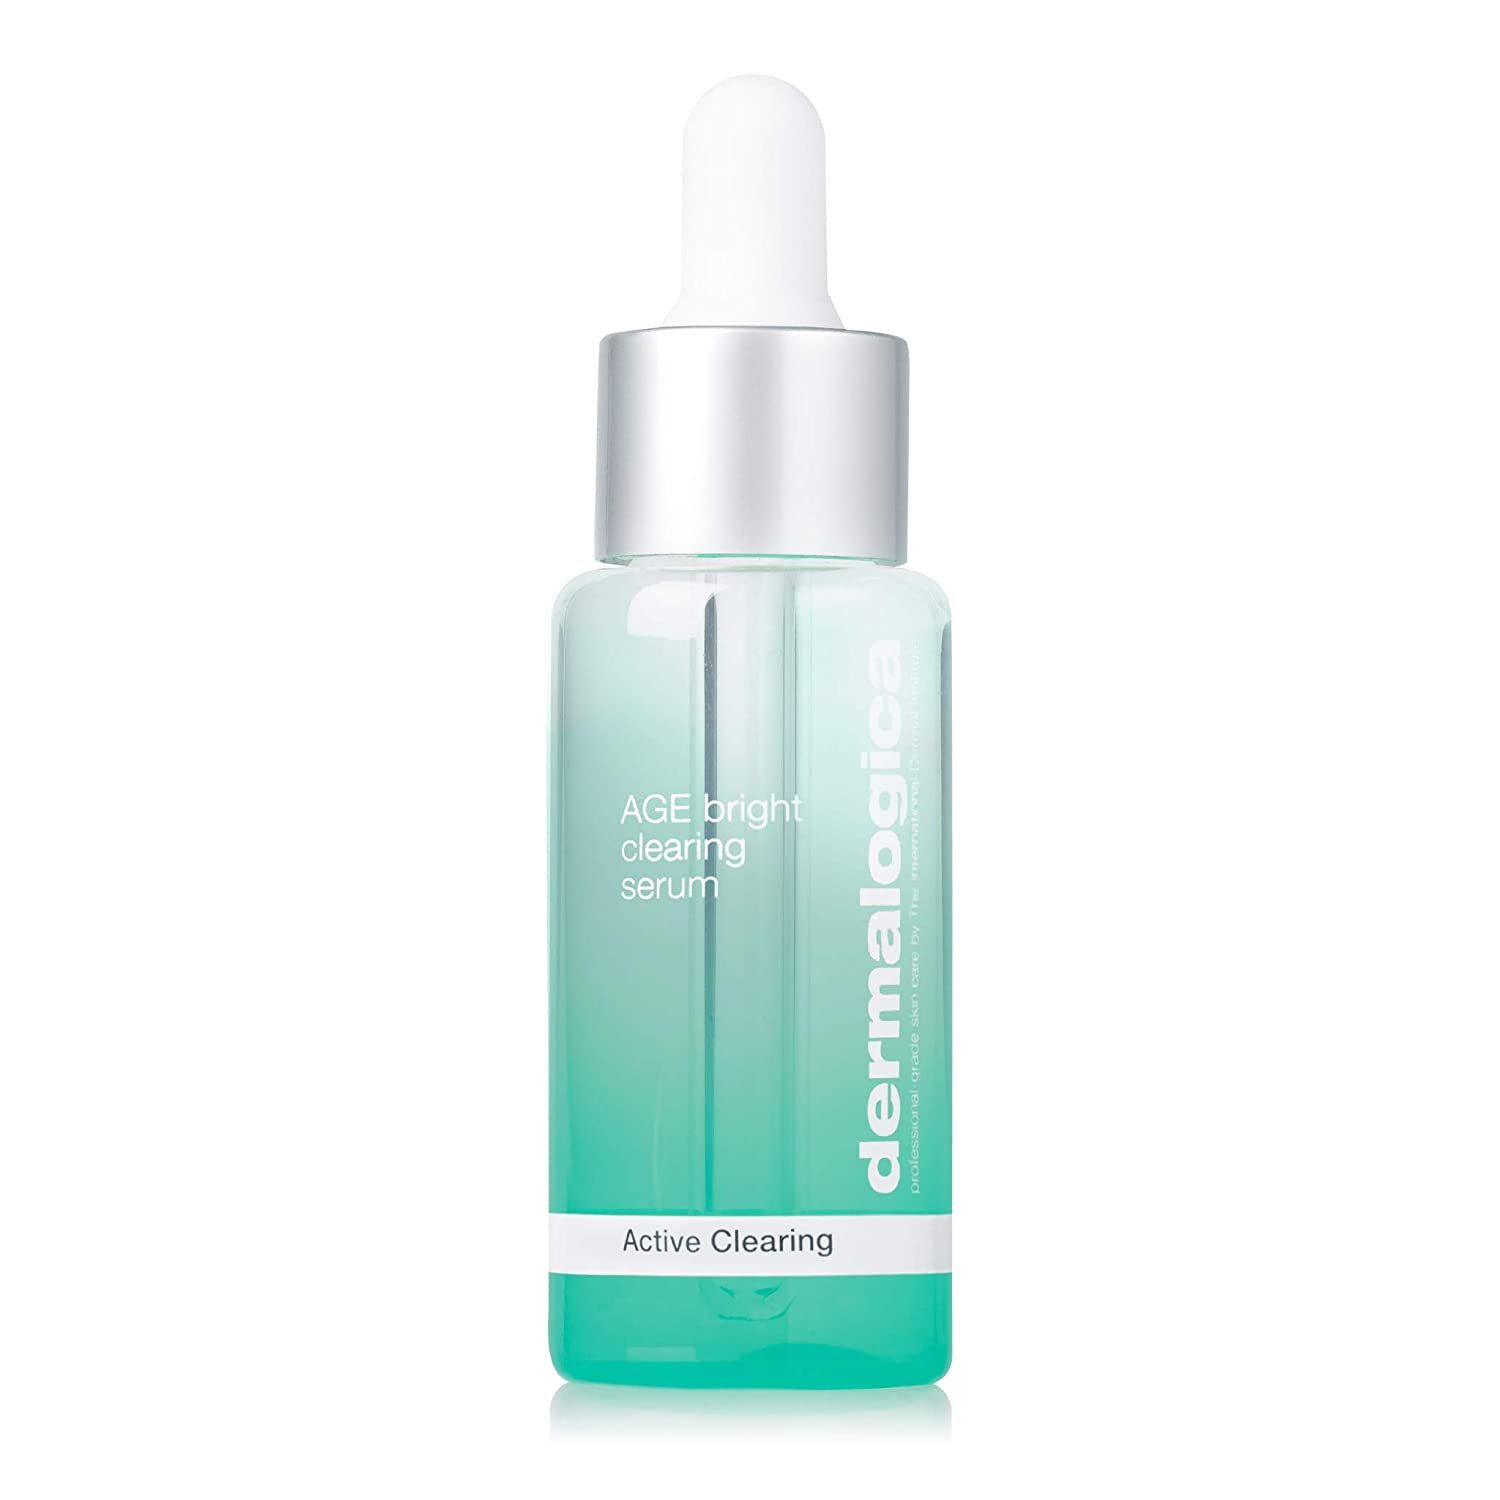 Primary image for DermaDermalogica Active Clearing Serum 1 oz